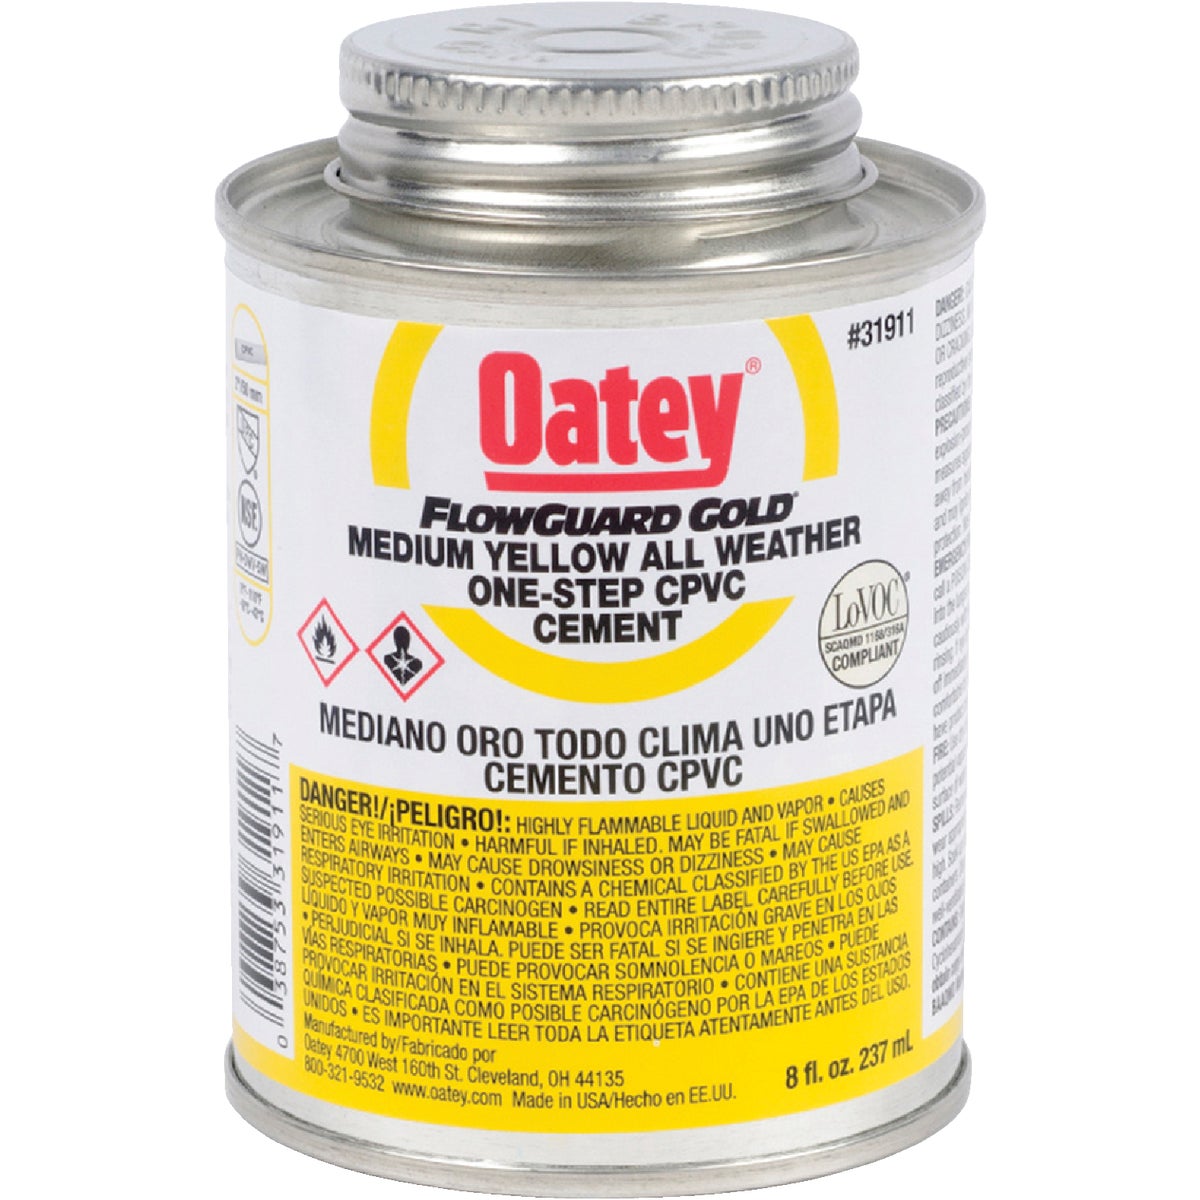 Oatey FlowGuard Gold 8 Oz. Medium Bodied Yellow All Weather One-Step CPVC Cement